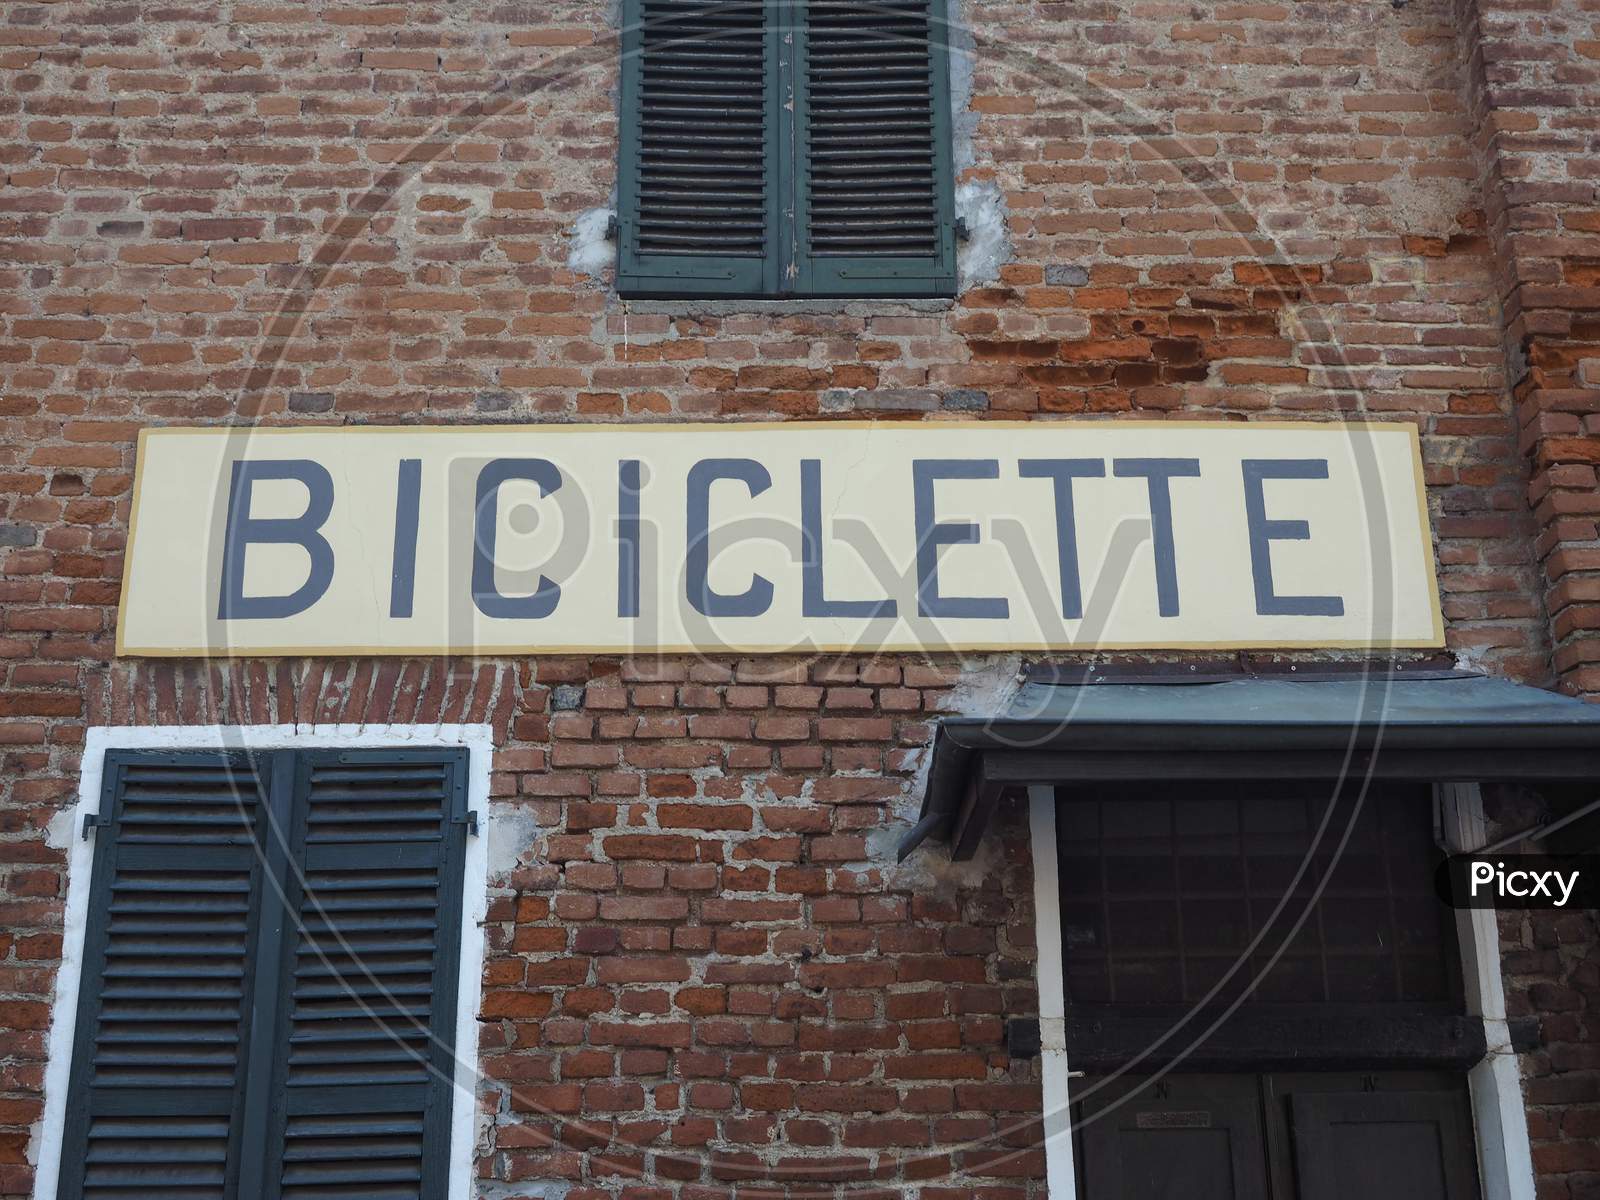 Biciclette (Bicycles) Sign